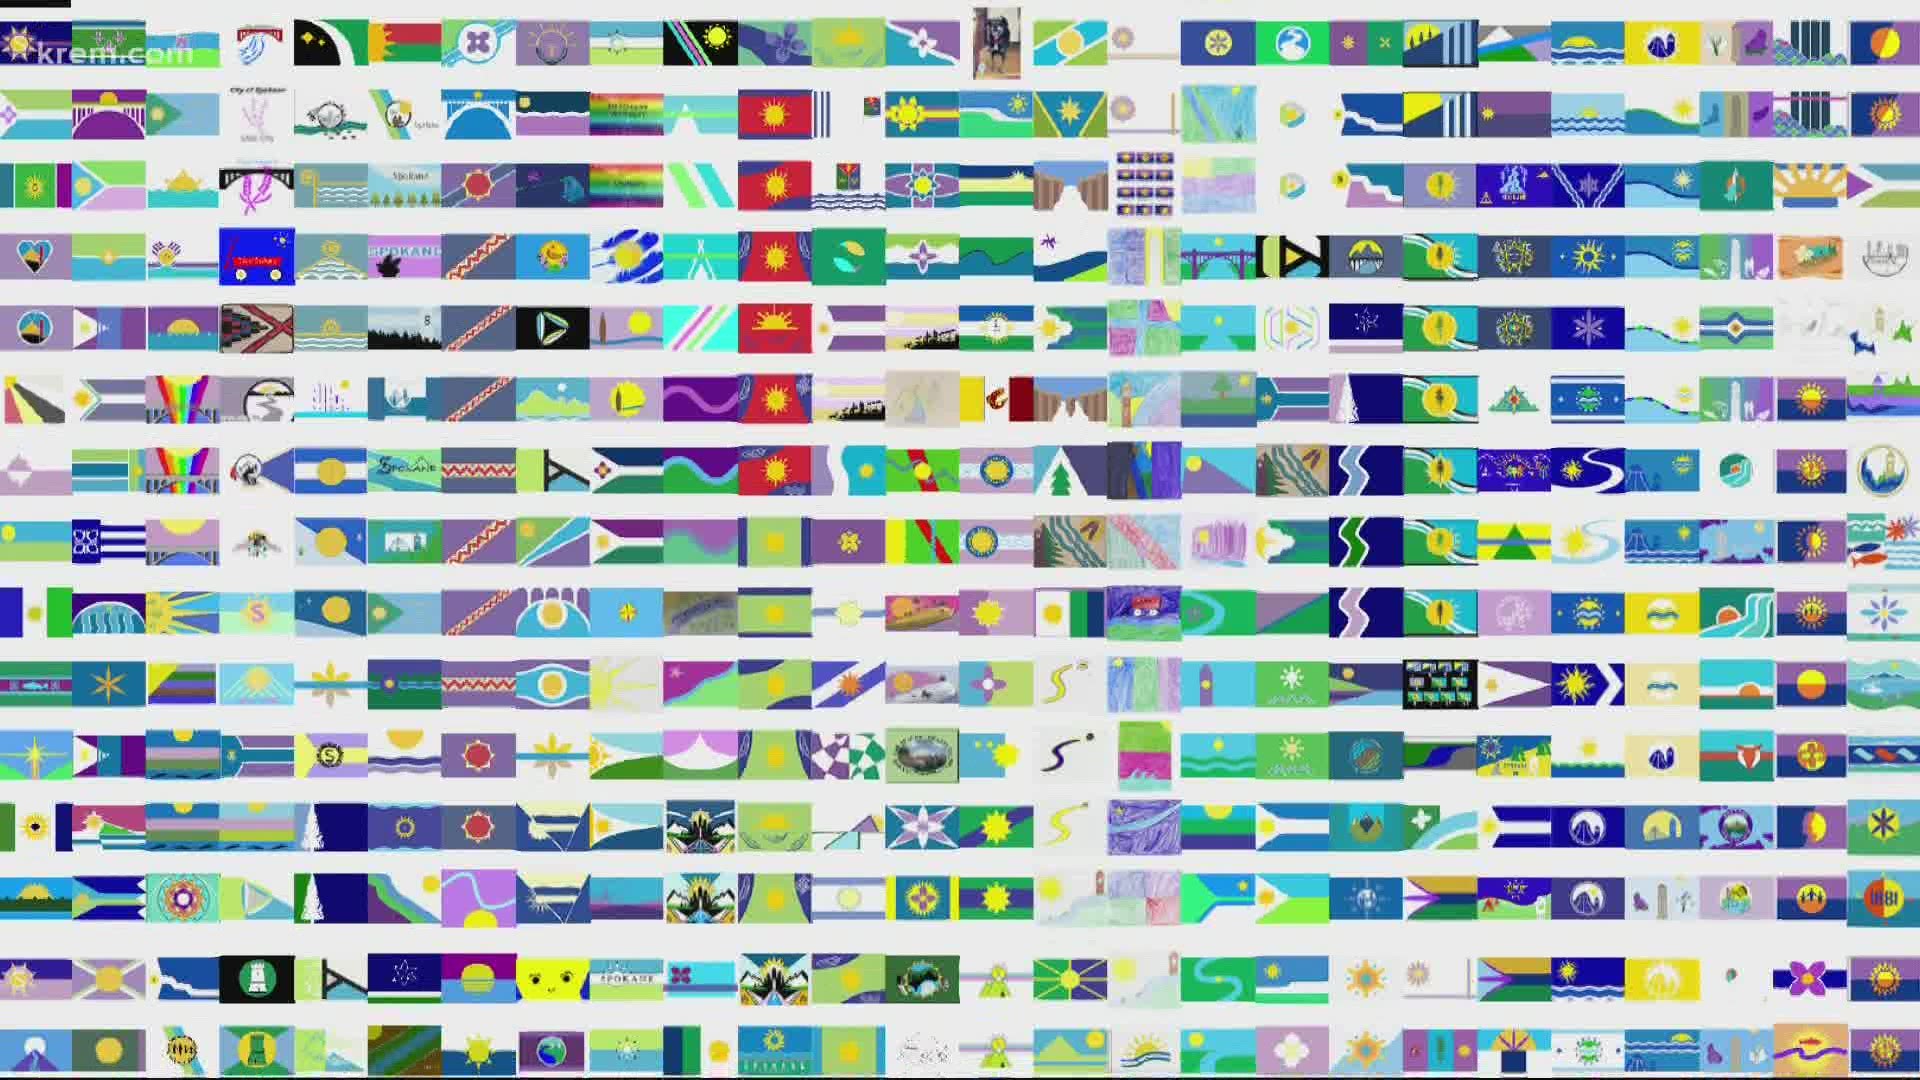 The Spokane Flag Commission has received over 400 design submissions for the new city flag.